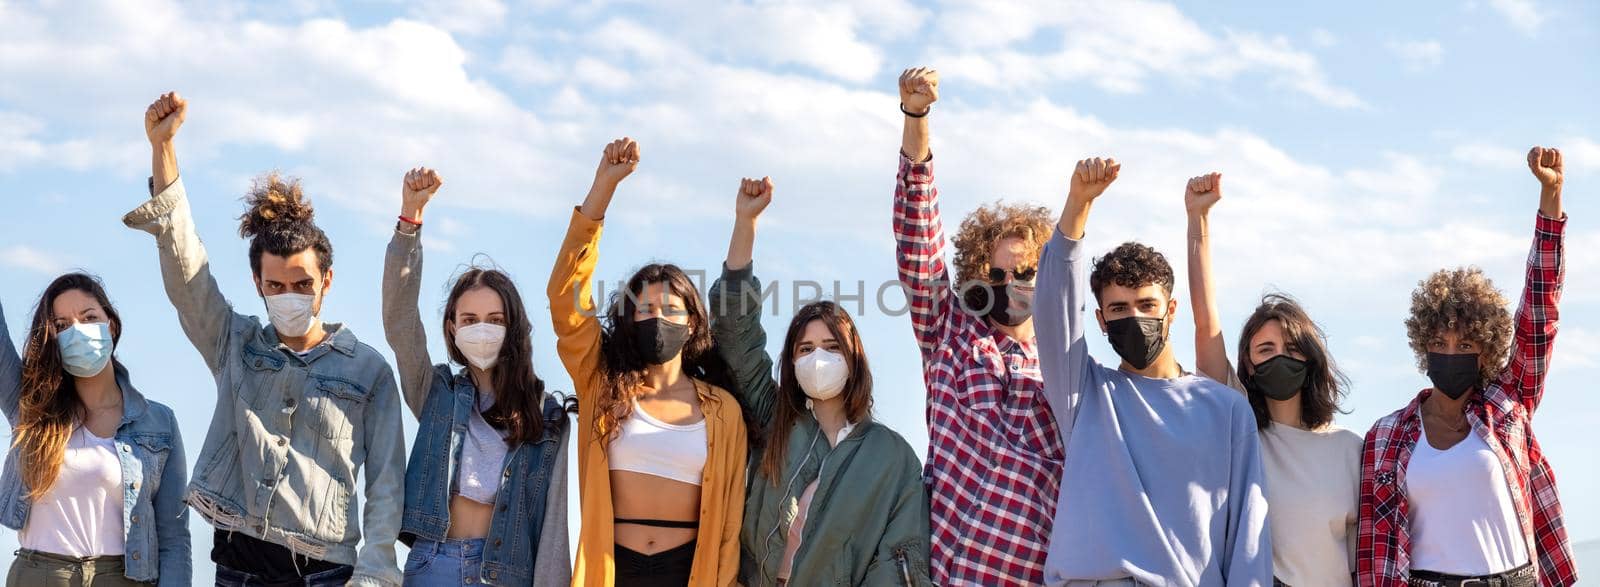 Panoramic image of multiracial activist protesters with fists raised up in the air wearing protective face mask protesting on the street. Demonstration concept.